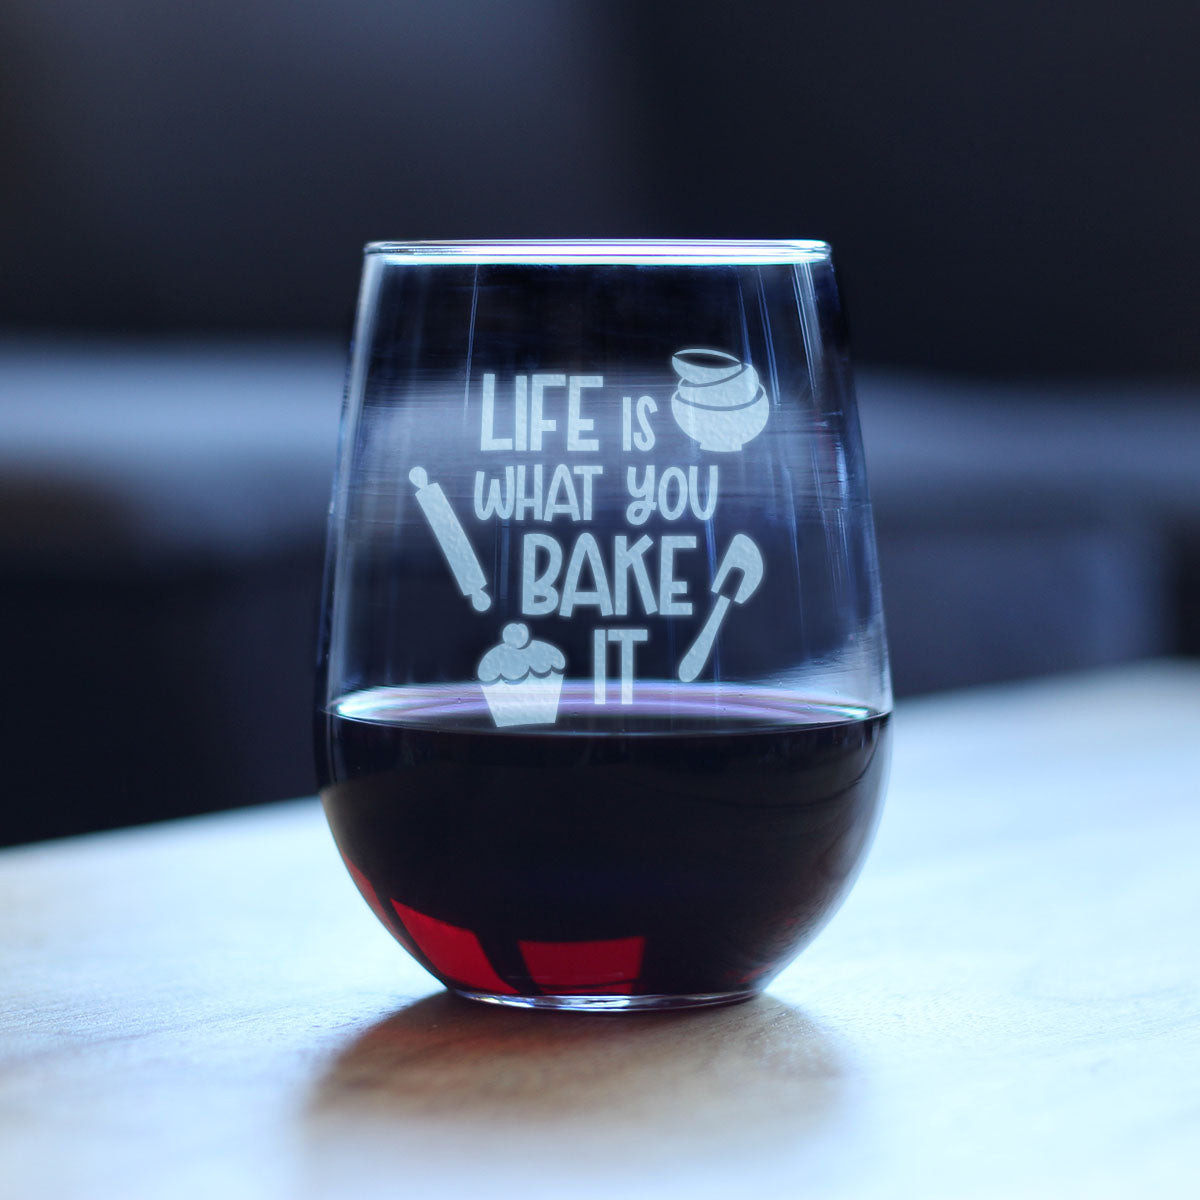 Life Is What You Bake It - Stemless Wine Glass - Funny Baking Themed Decor and Gifts for Bakers - Large 17 Oz Glasses